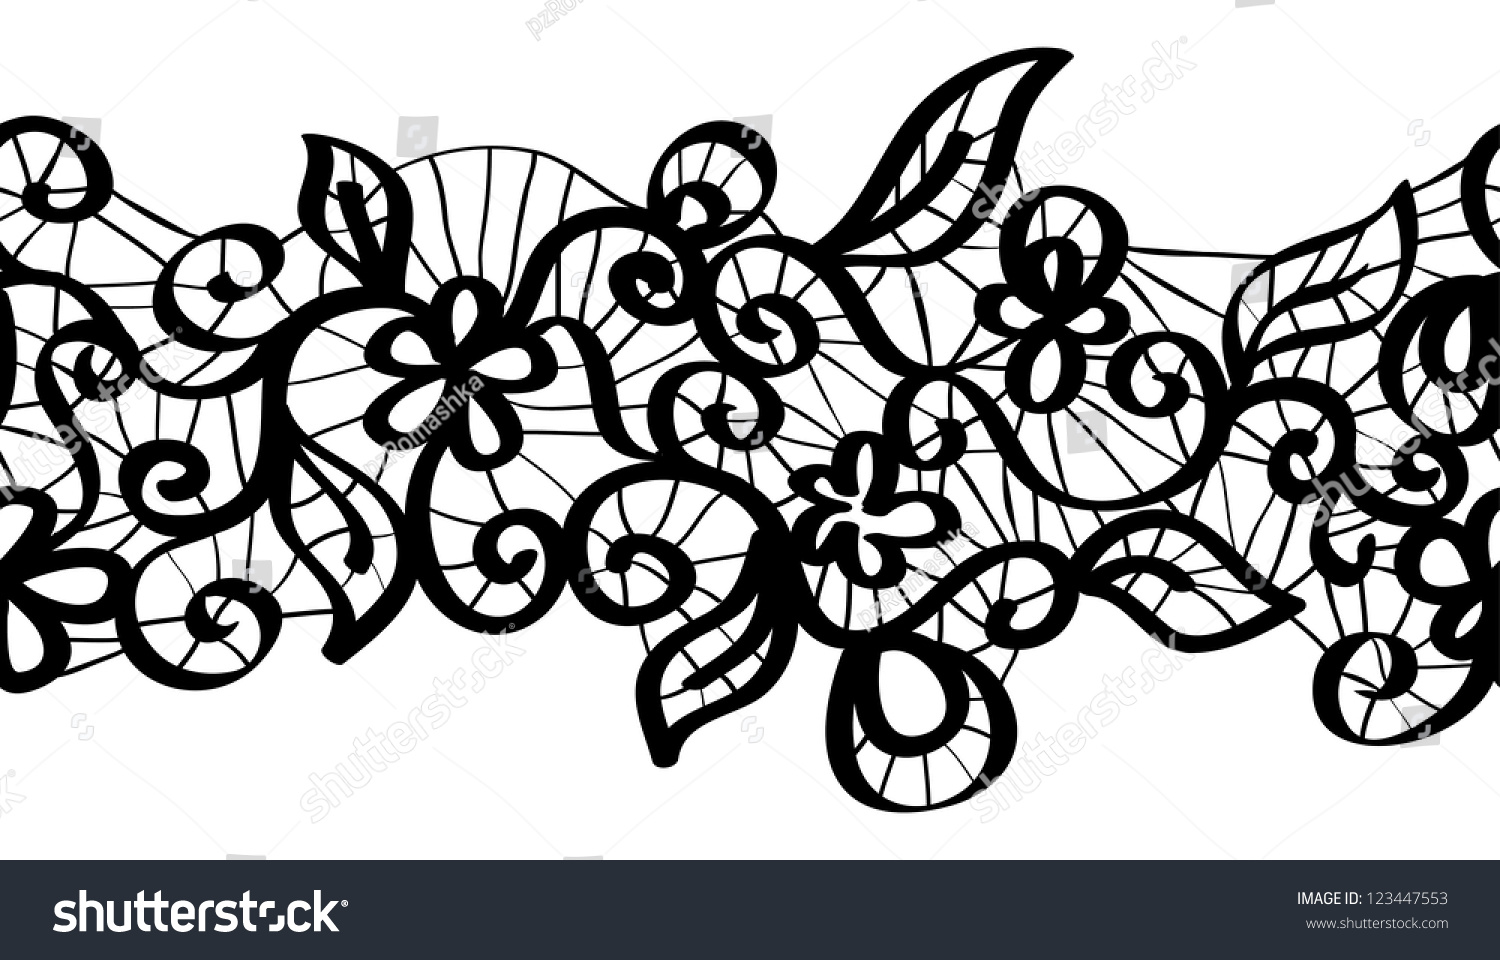 Seamless Vector Black Lace Floral Pattern Stock Vector 123447553